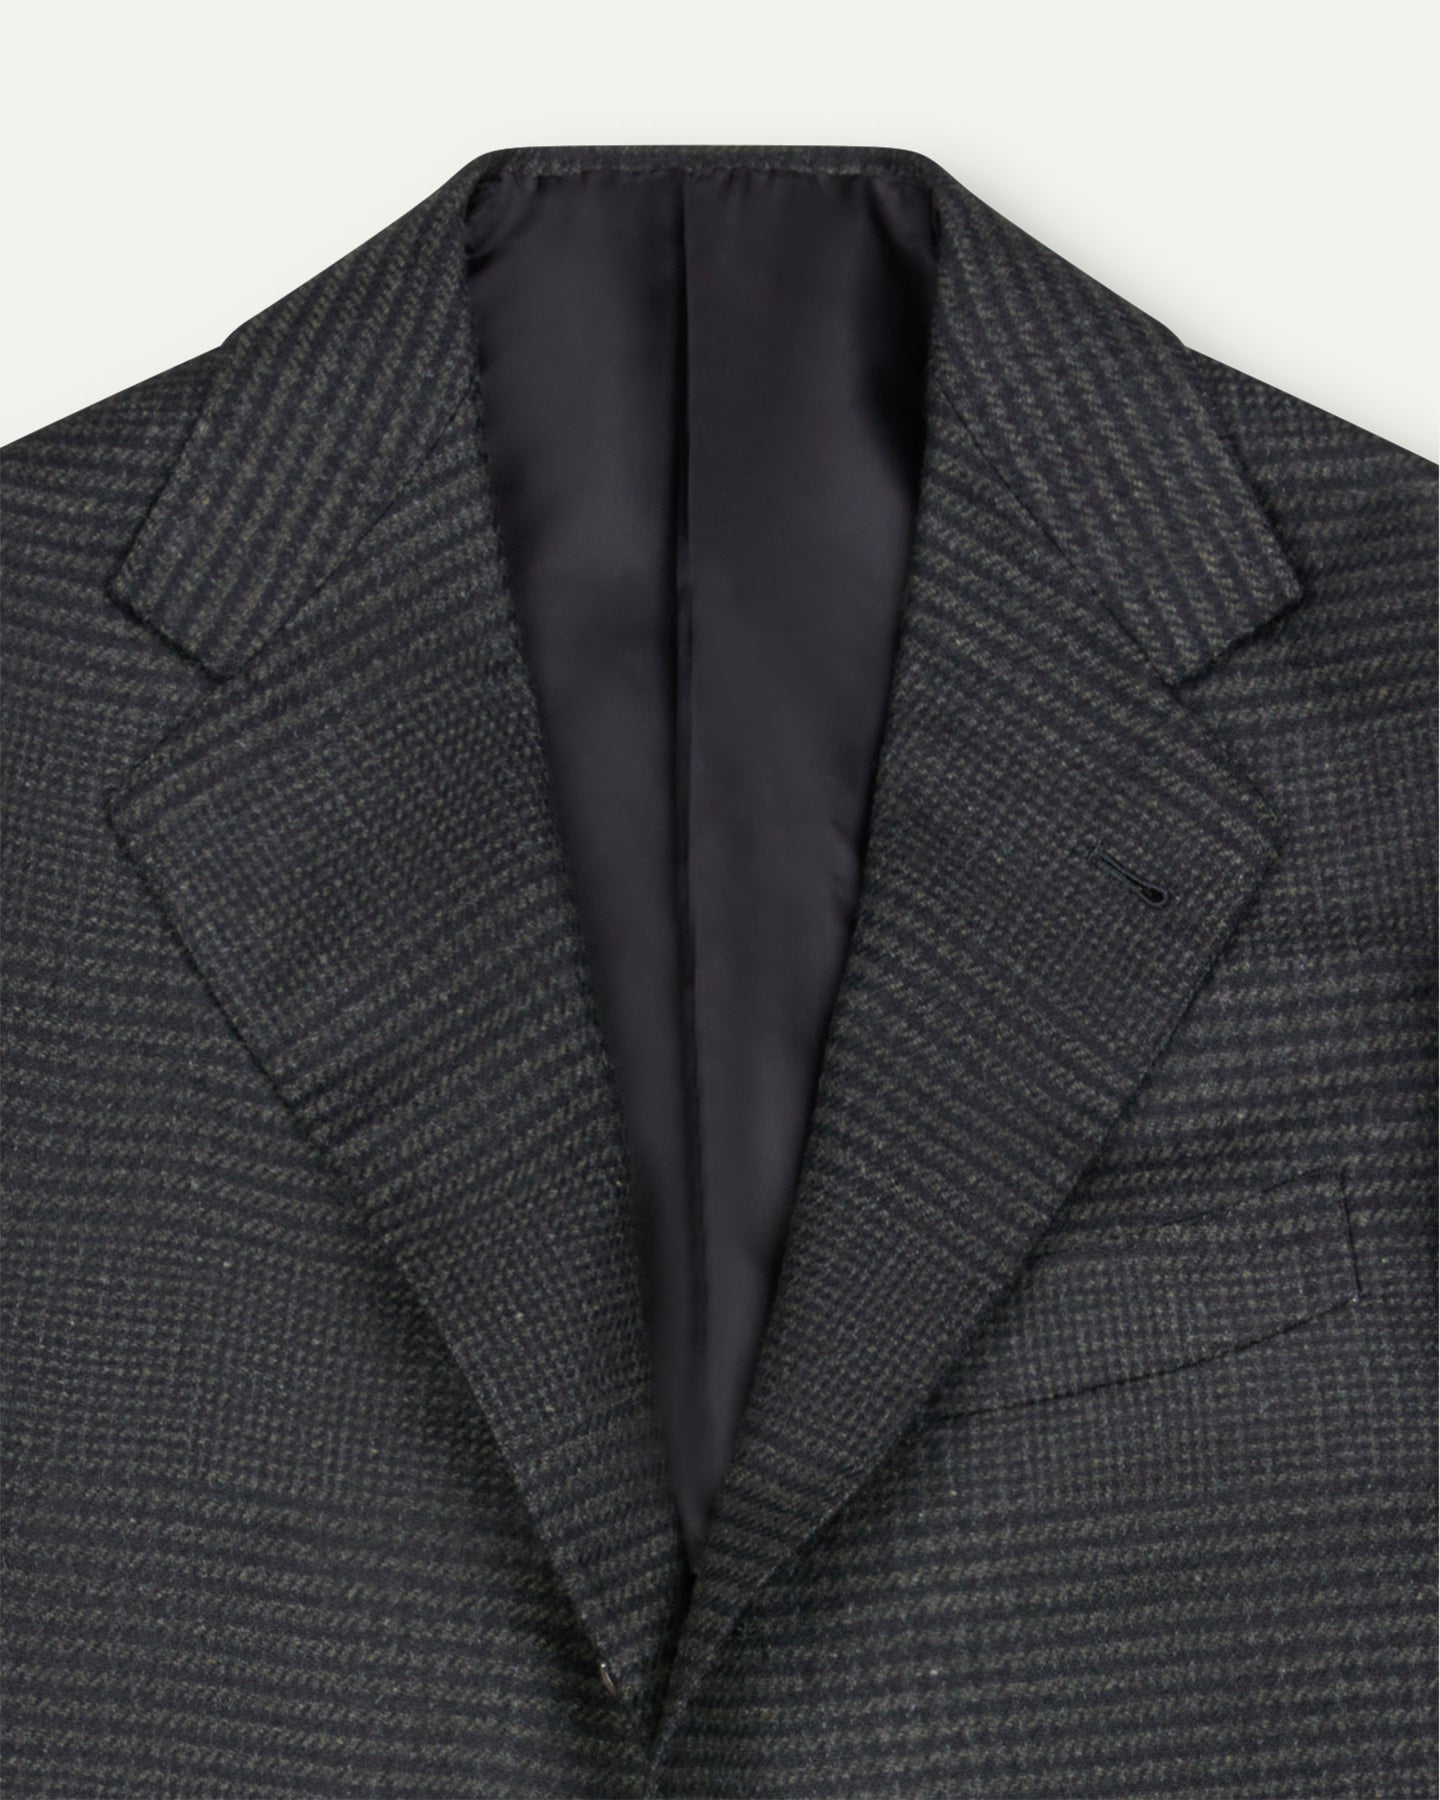 Made-To-Order Sport Coat Dark Grey Prince Of Wales